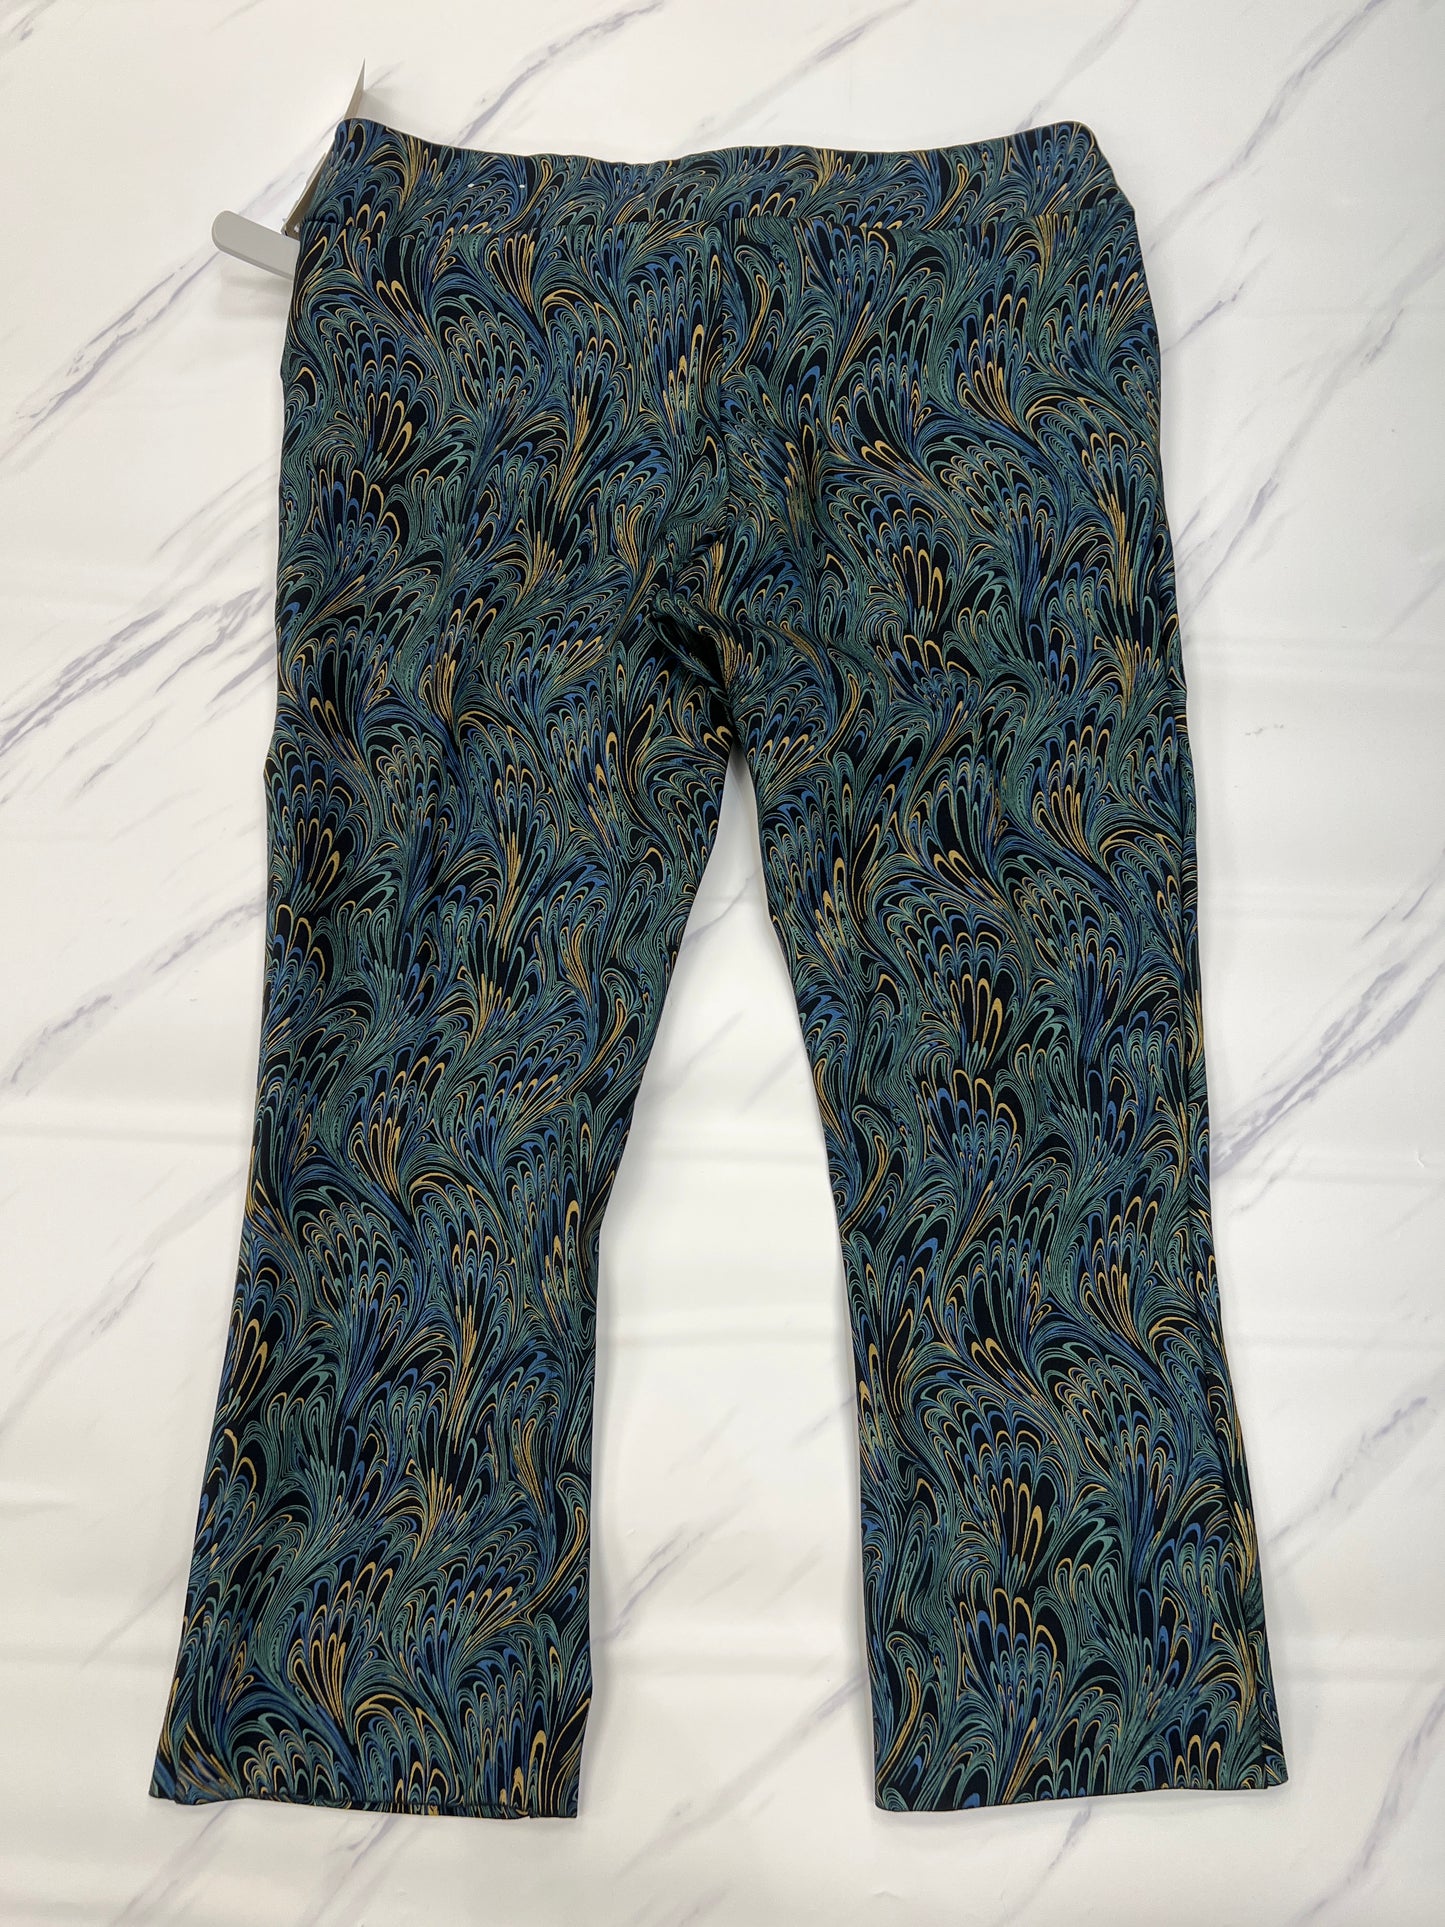 Pants Ankle By Soft Surroundings  Size: 2x